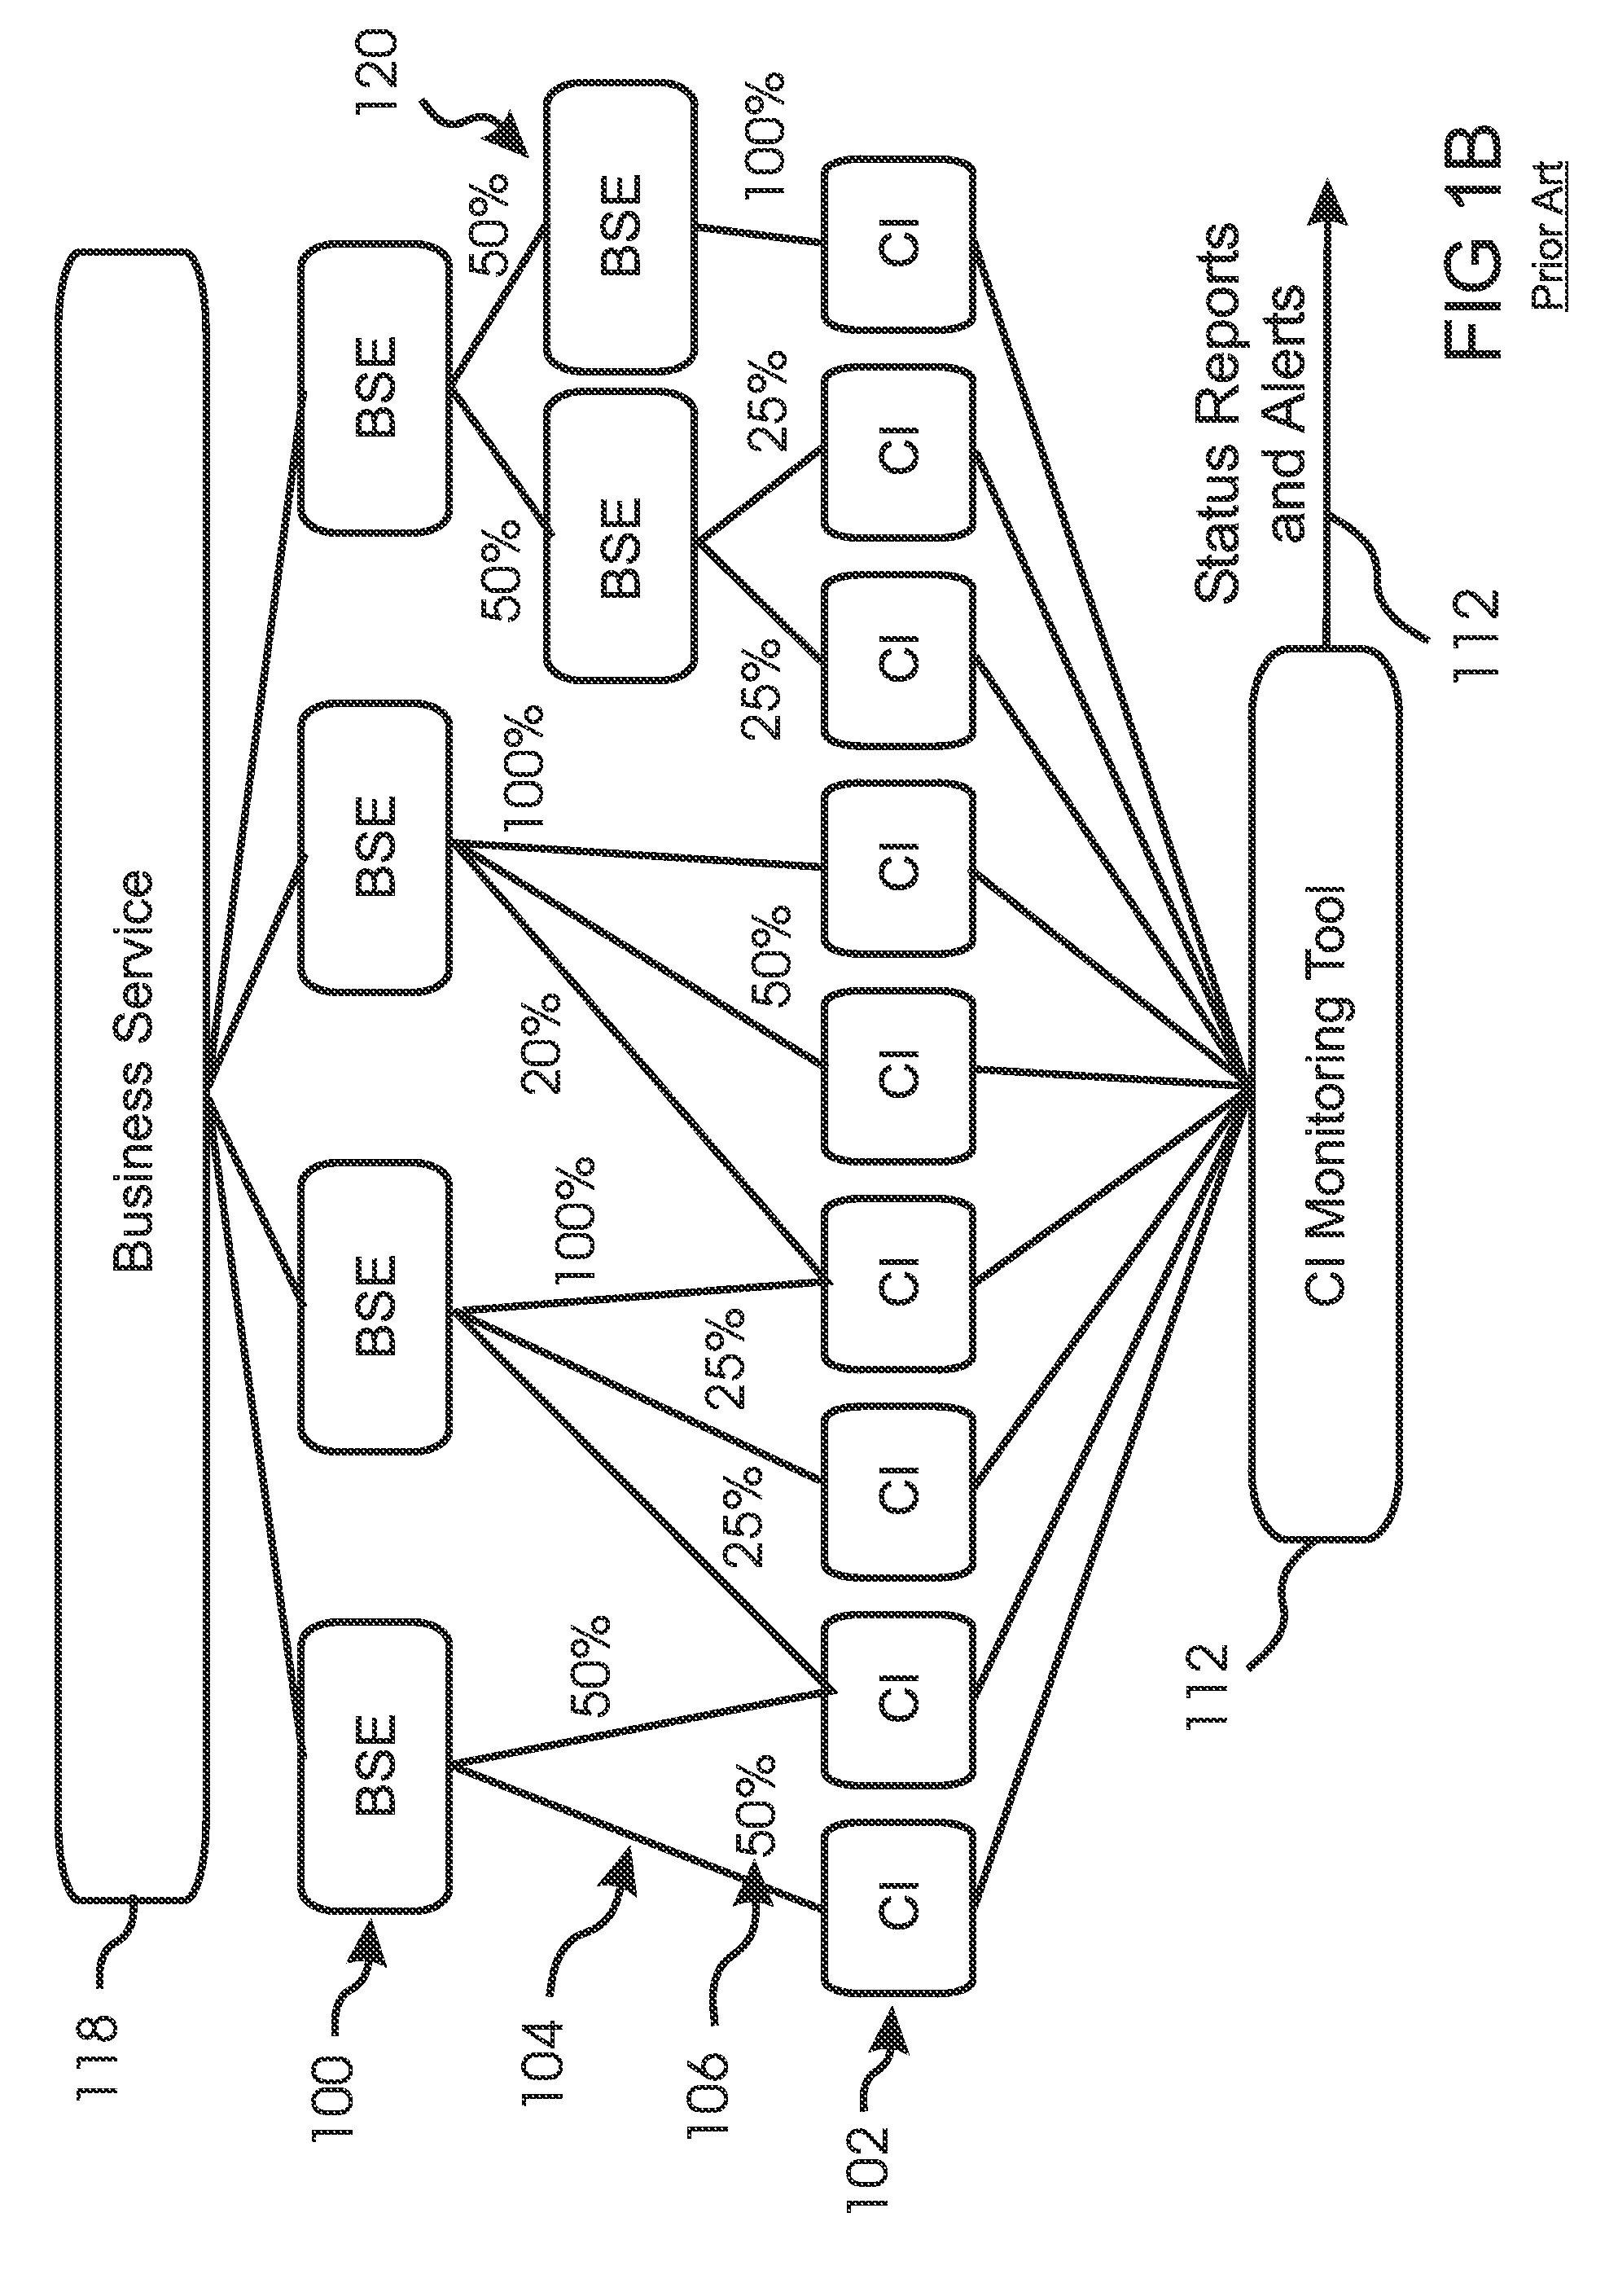 Balanced Scorecard Method for Determining an Impact on a Business Service Caused by Degraded Operation of an IT System Component